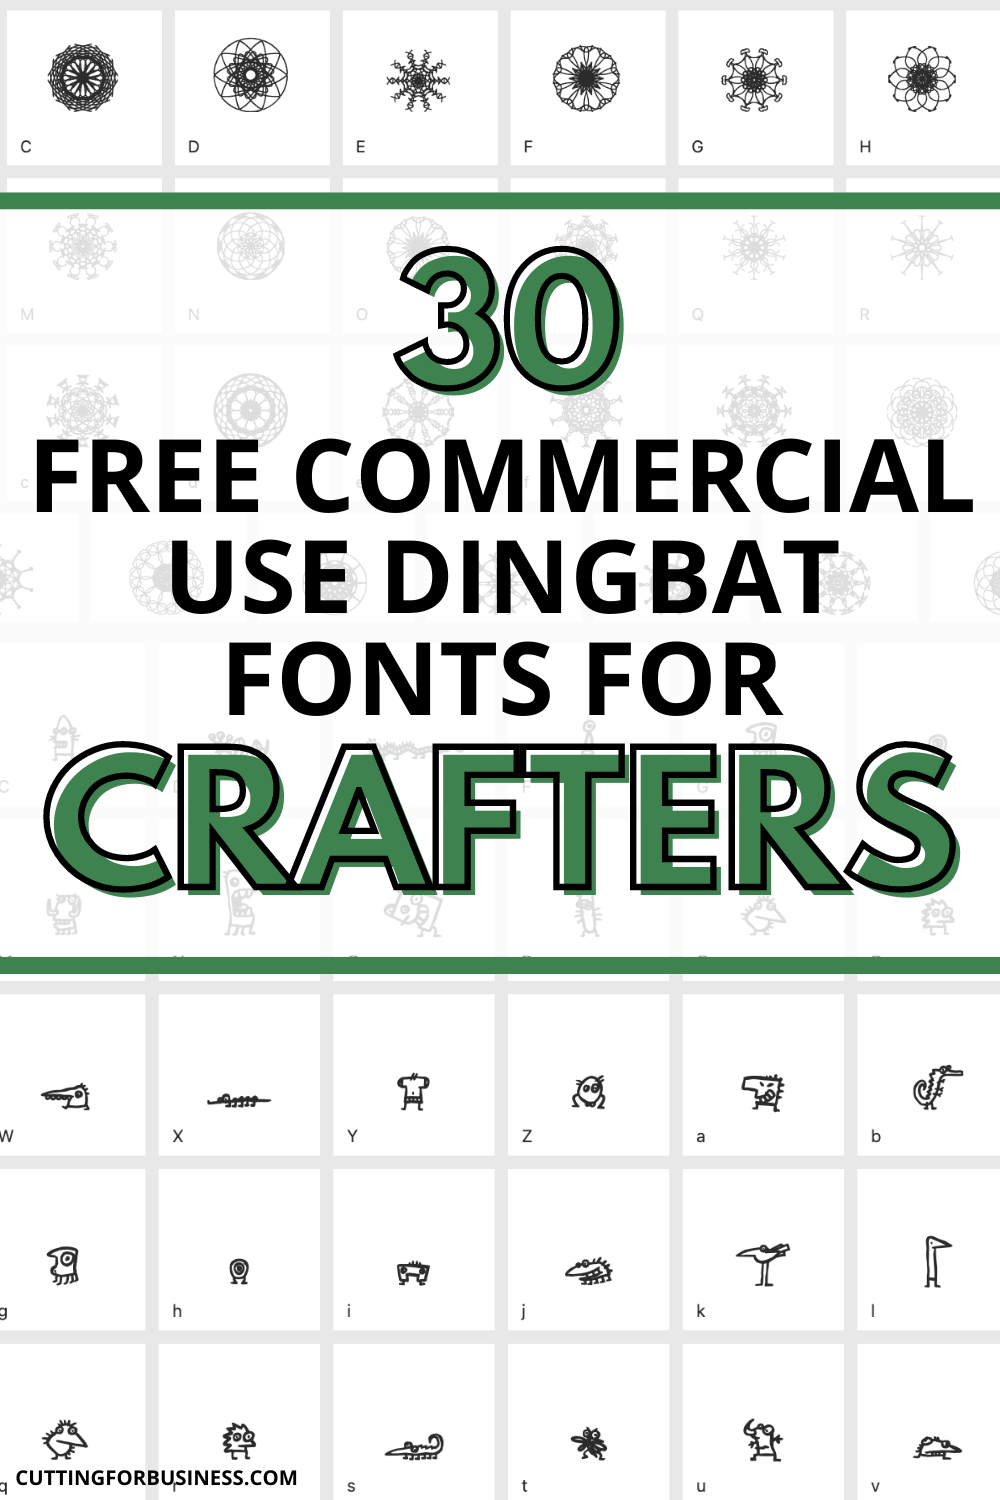 30 Free Commercial Use Dingbat Fonts for Crafters - cuttingforbusiness.com